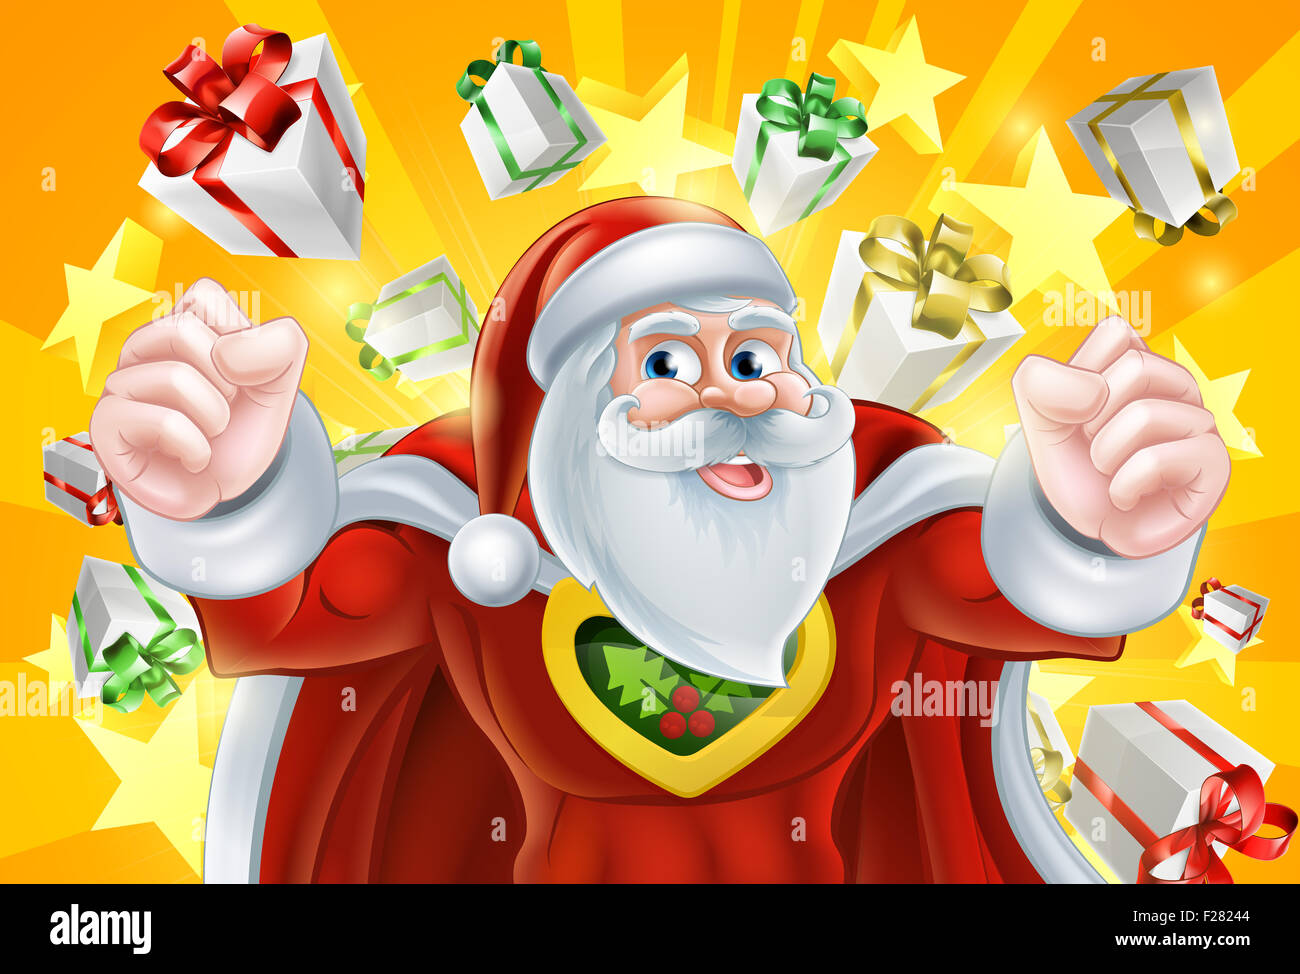 Cartoon Santa Claus Christmas superhero character with gifts and stars explosion in the background Stock Photo